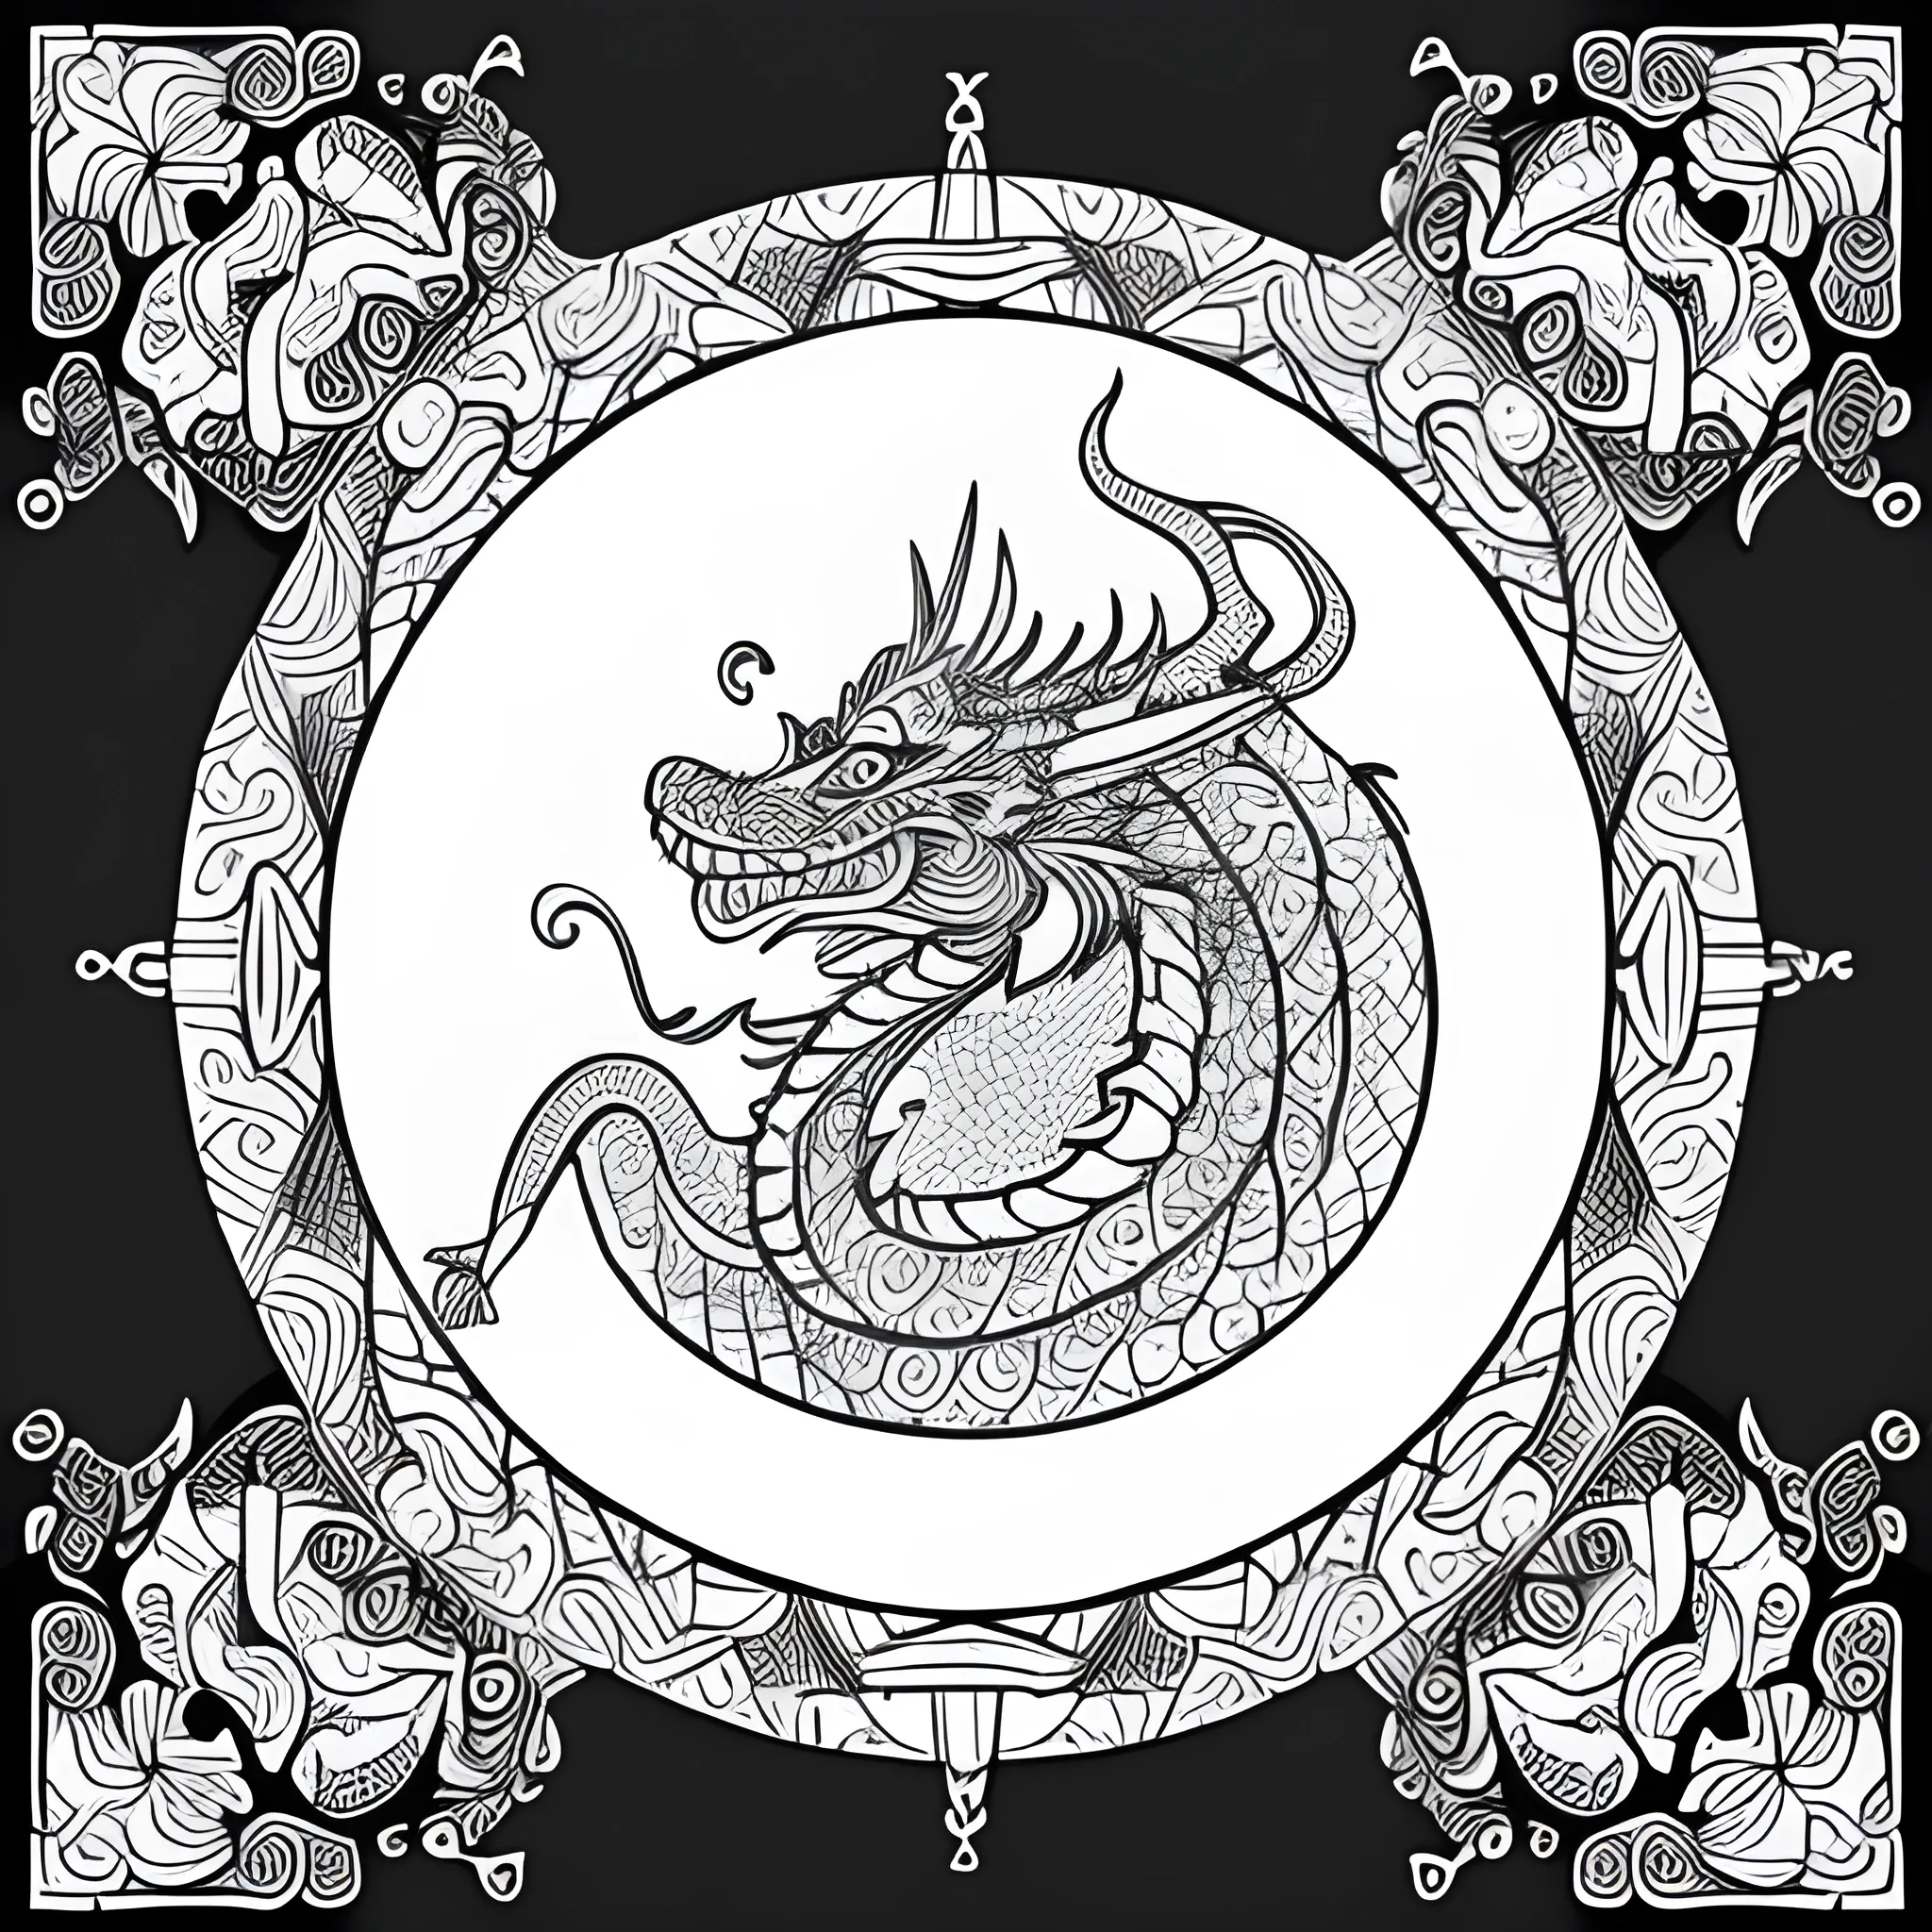 coloring book page of a mandala dragon inspired in the chineese culture